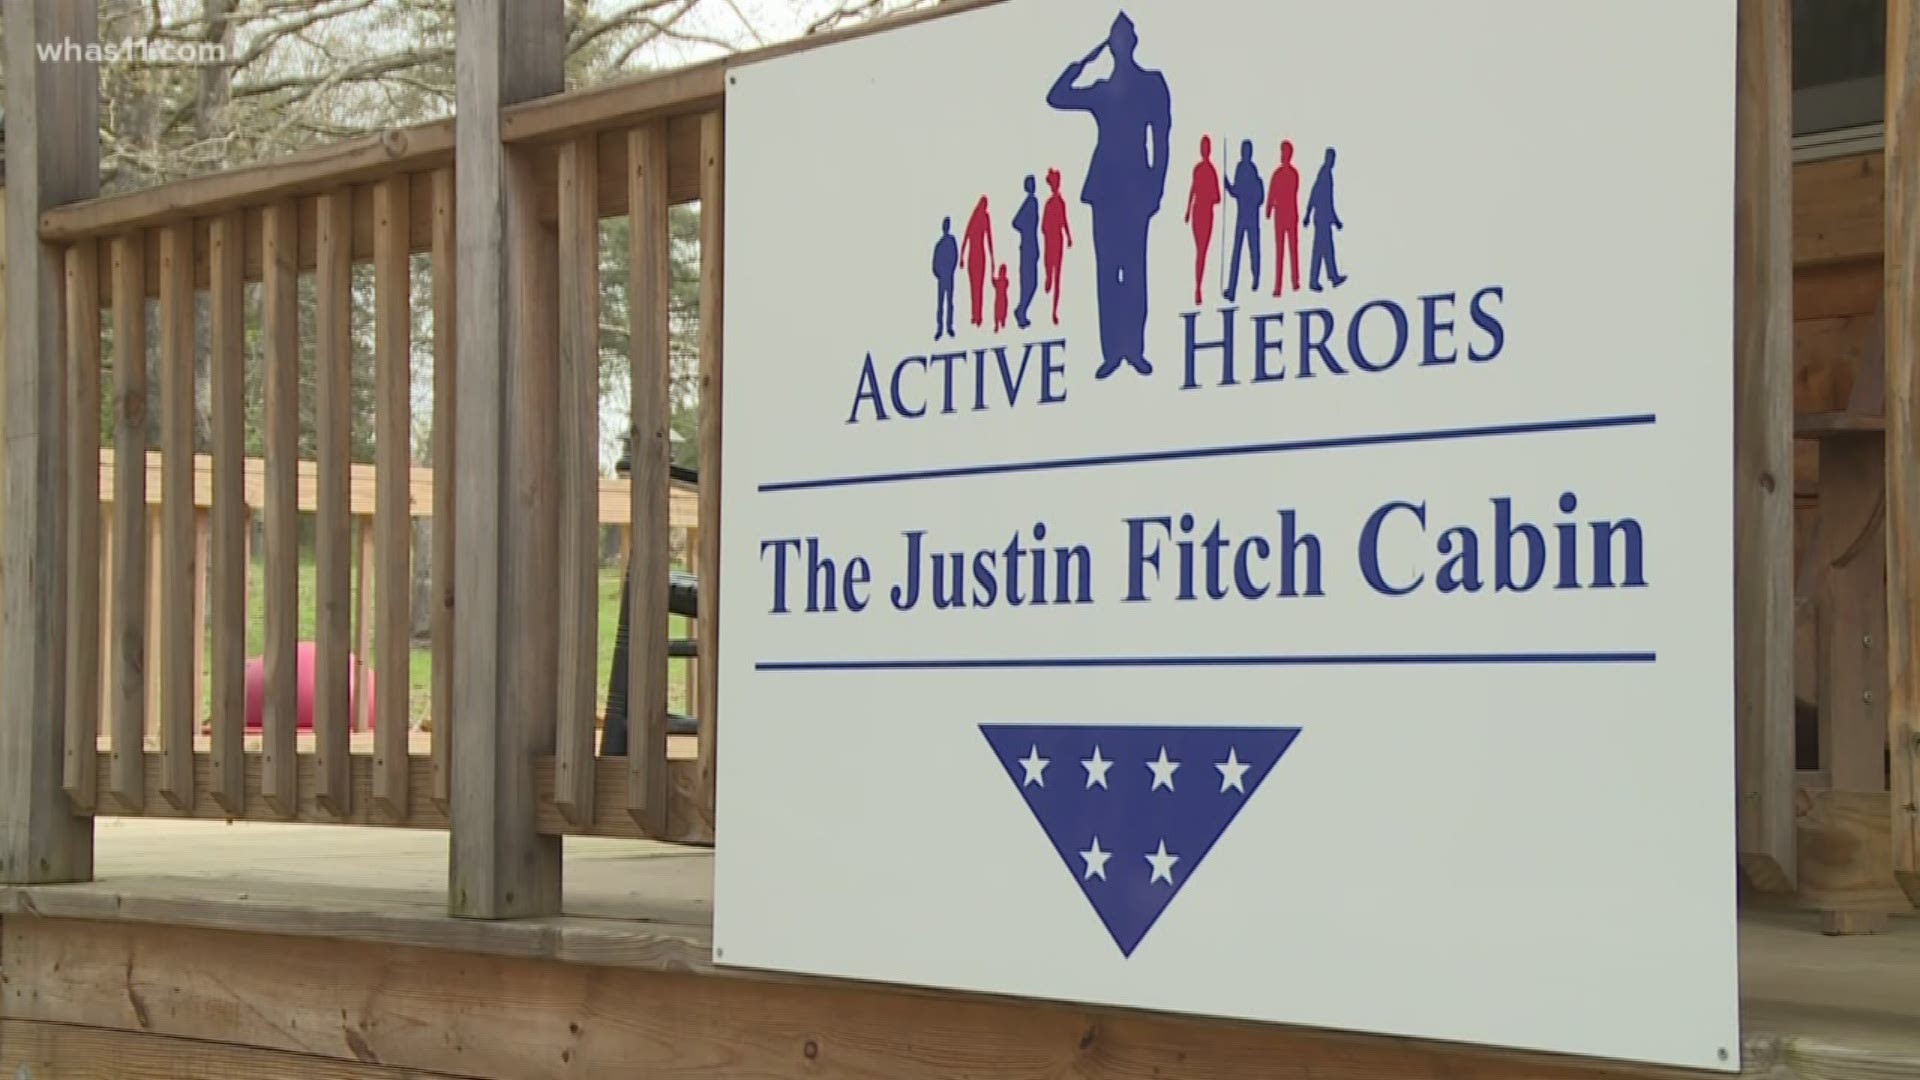 Justin Fitch passed away after a fight with stage four colon cancer in 2015, but dedicated the last days of his life to supporting the charity that saved his life in 2011: Active Heroes.